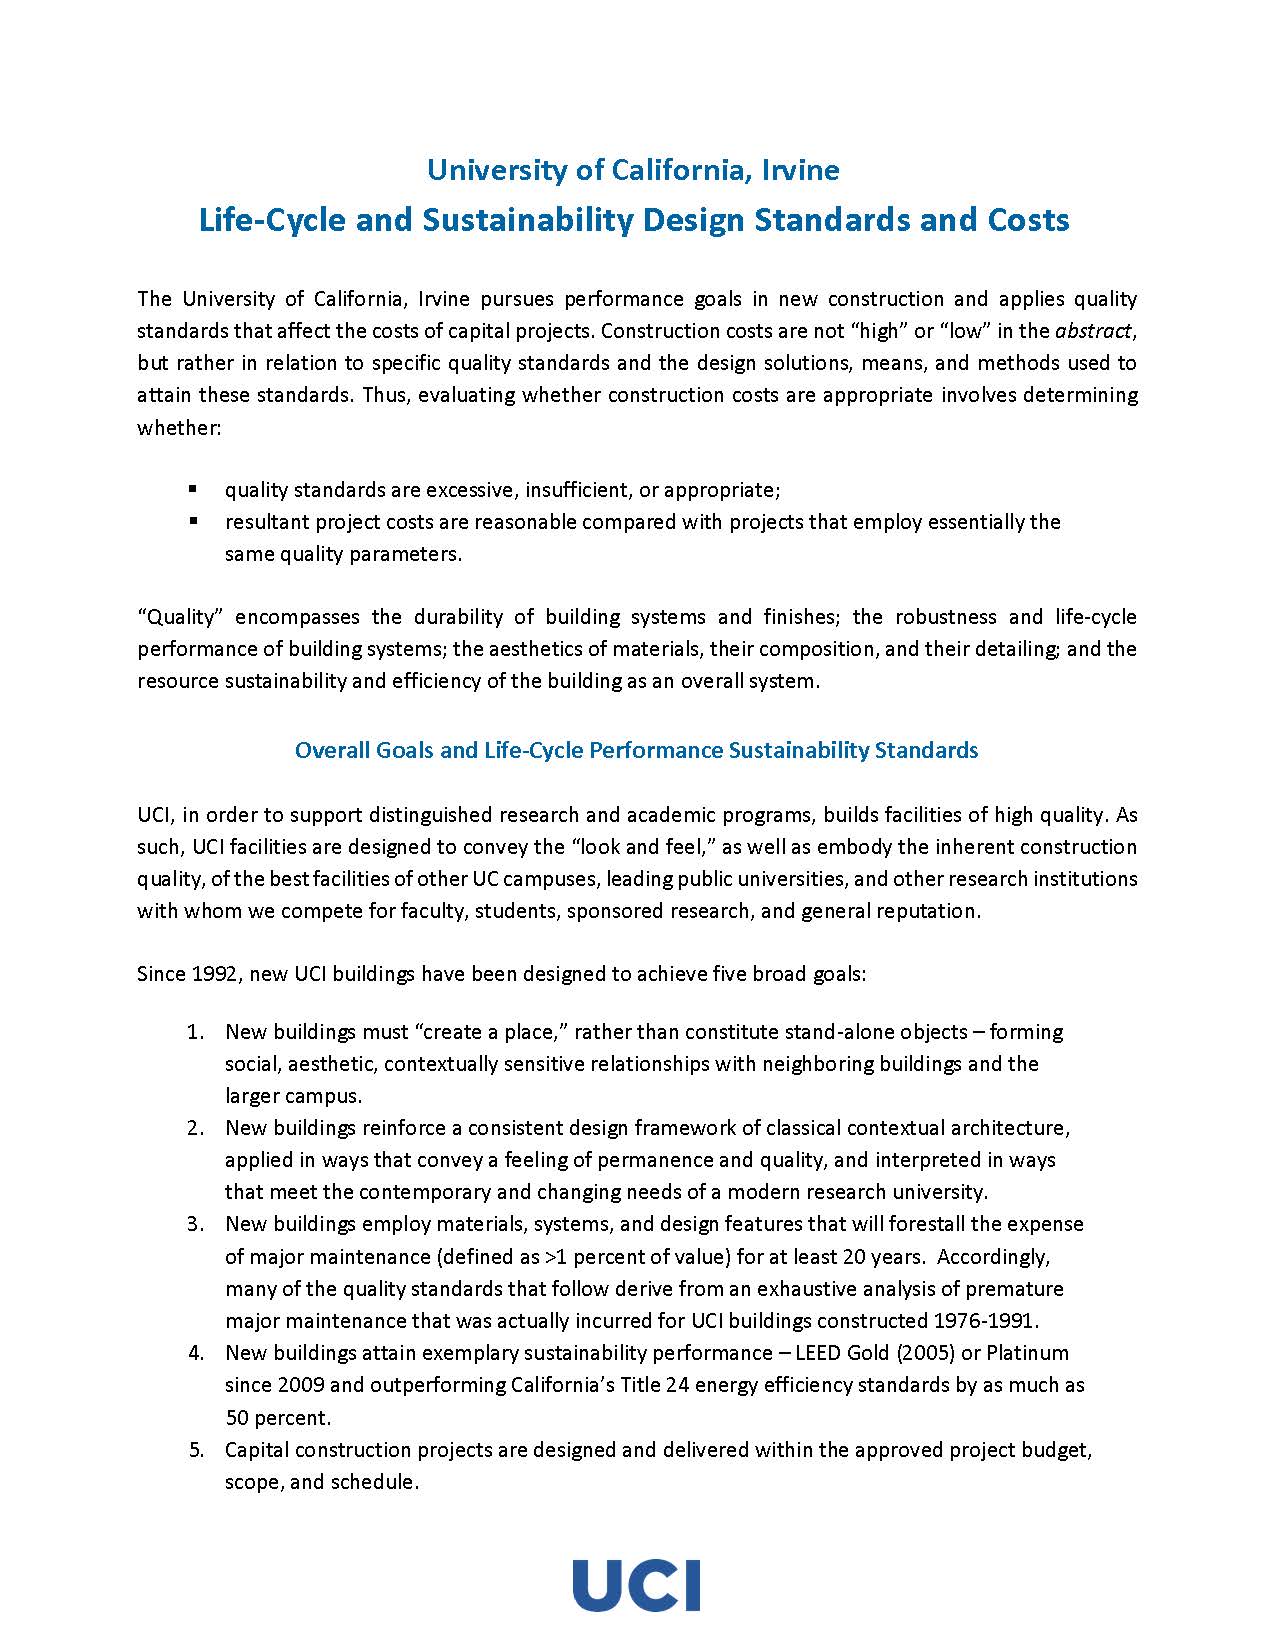 UCI Life Cycle Design Standards and Costs preview